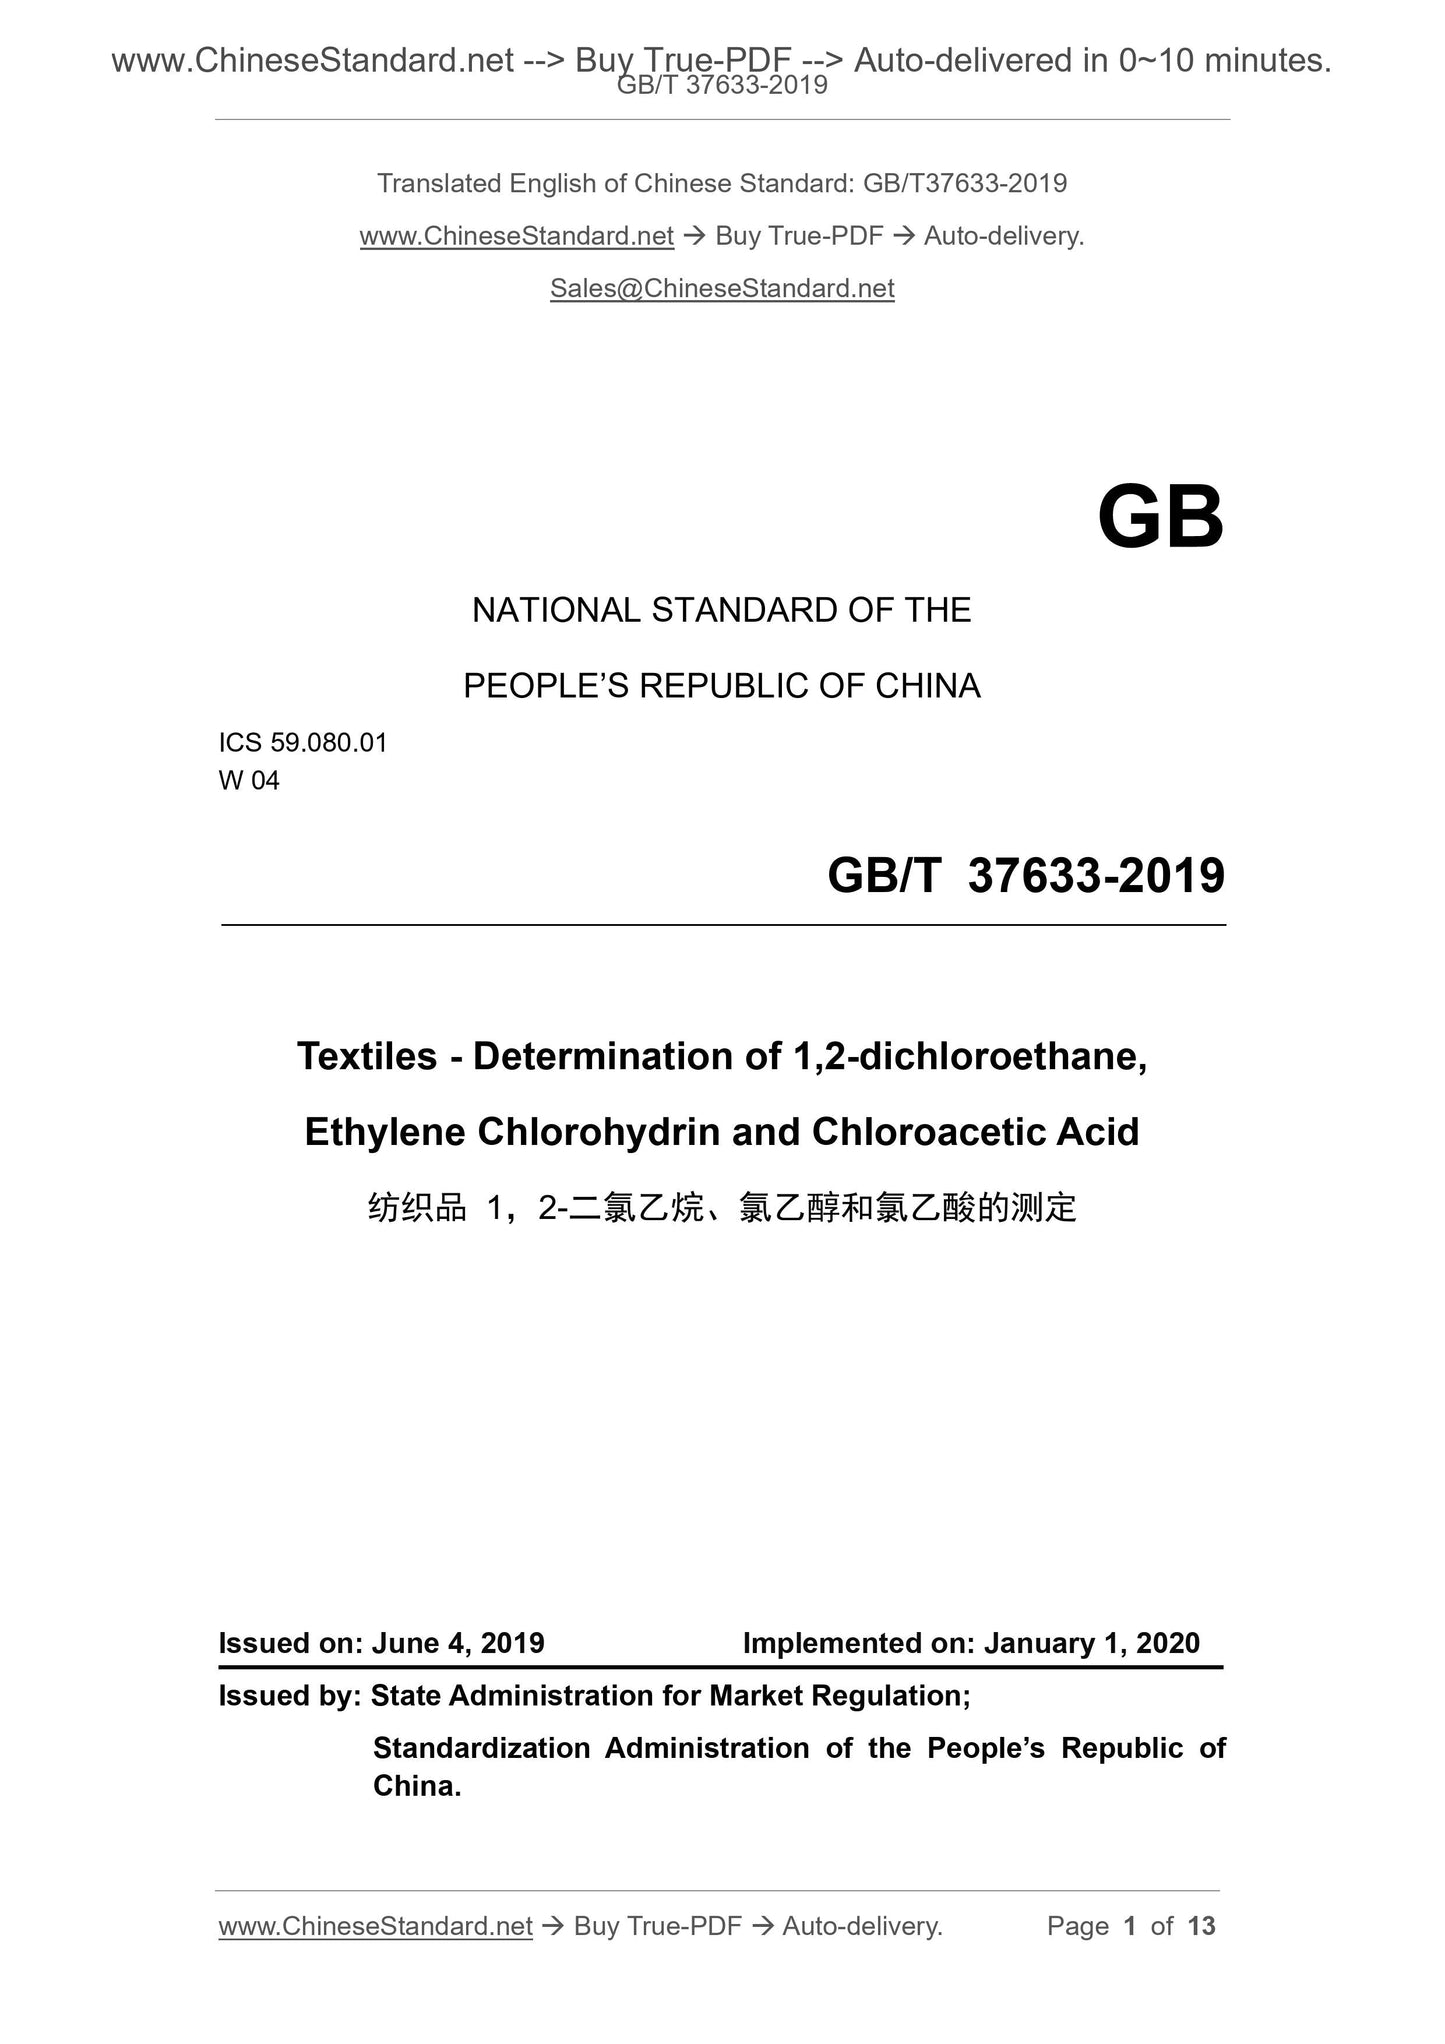 GB/T 37633-2019 Page 1